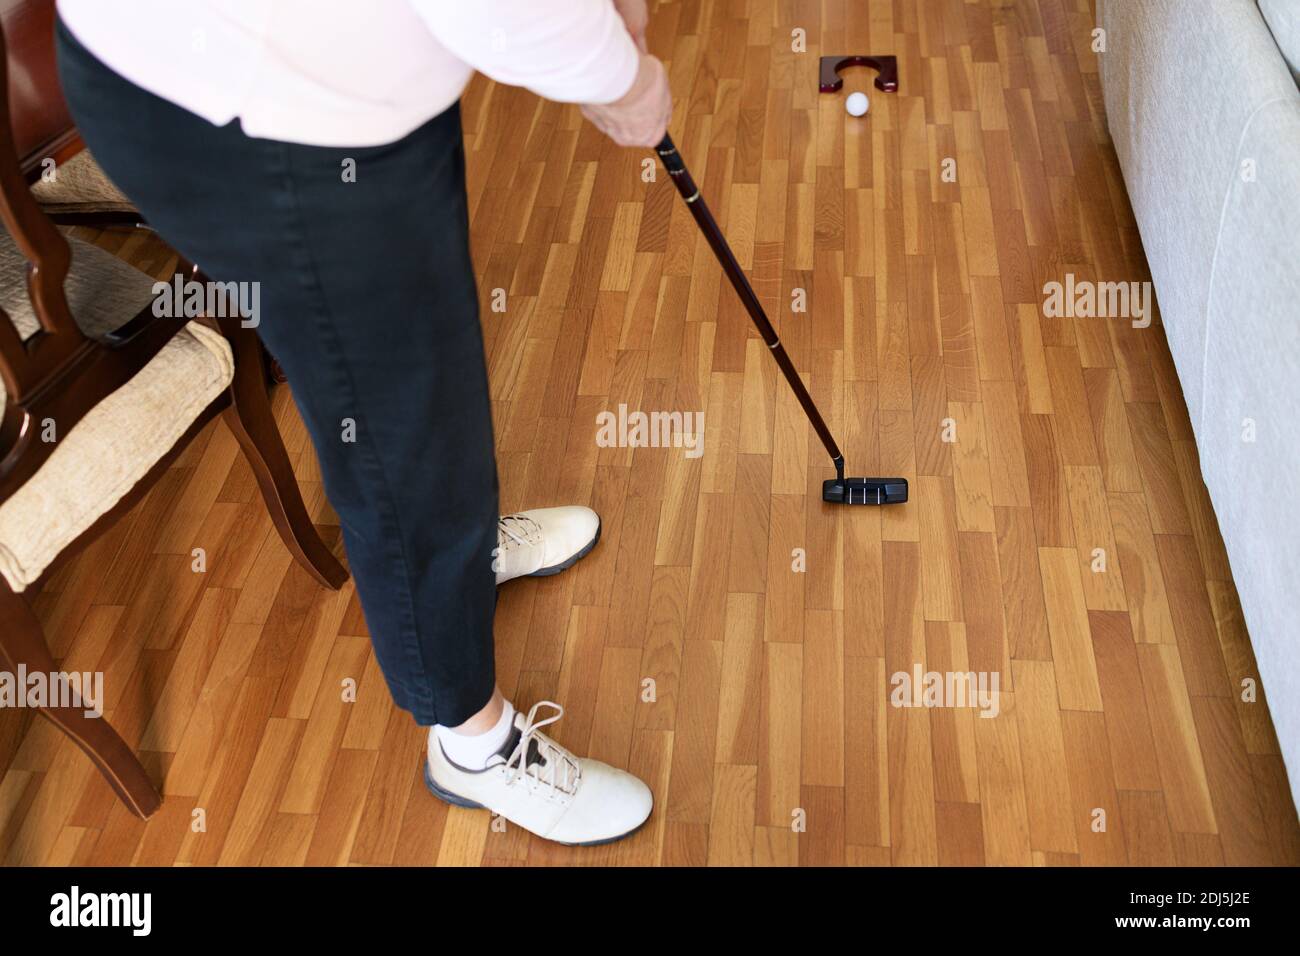 Woman playing mini golf at home. Stay at home concept Stock Photo